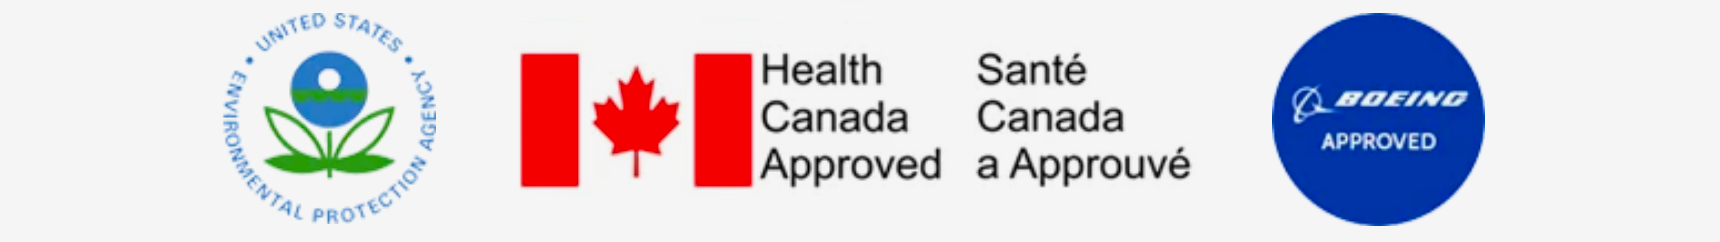 US EPA Approved, Health Canada Approved, Boeing Approved